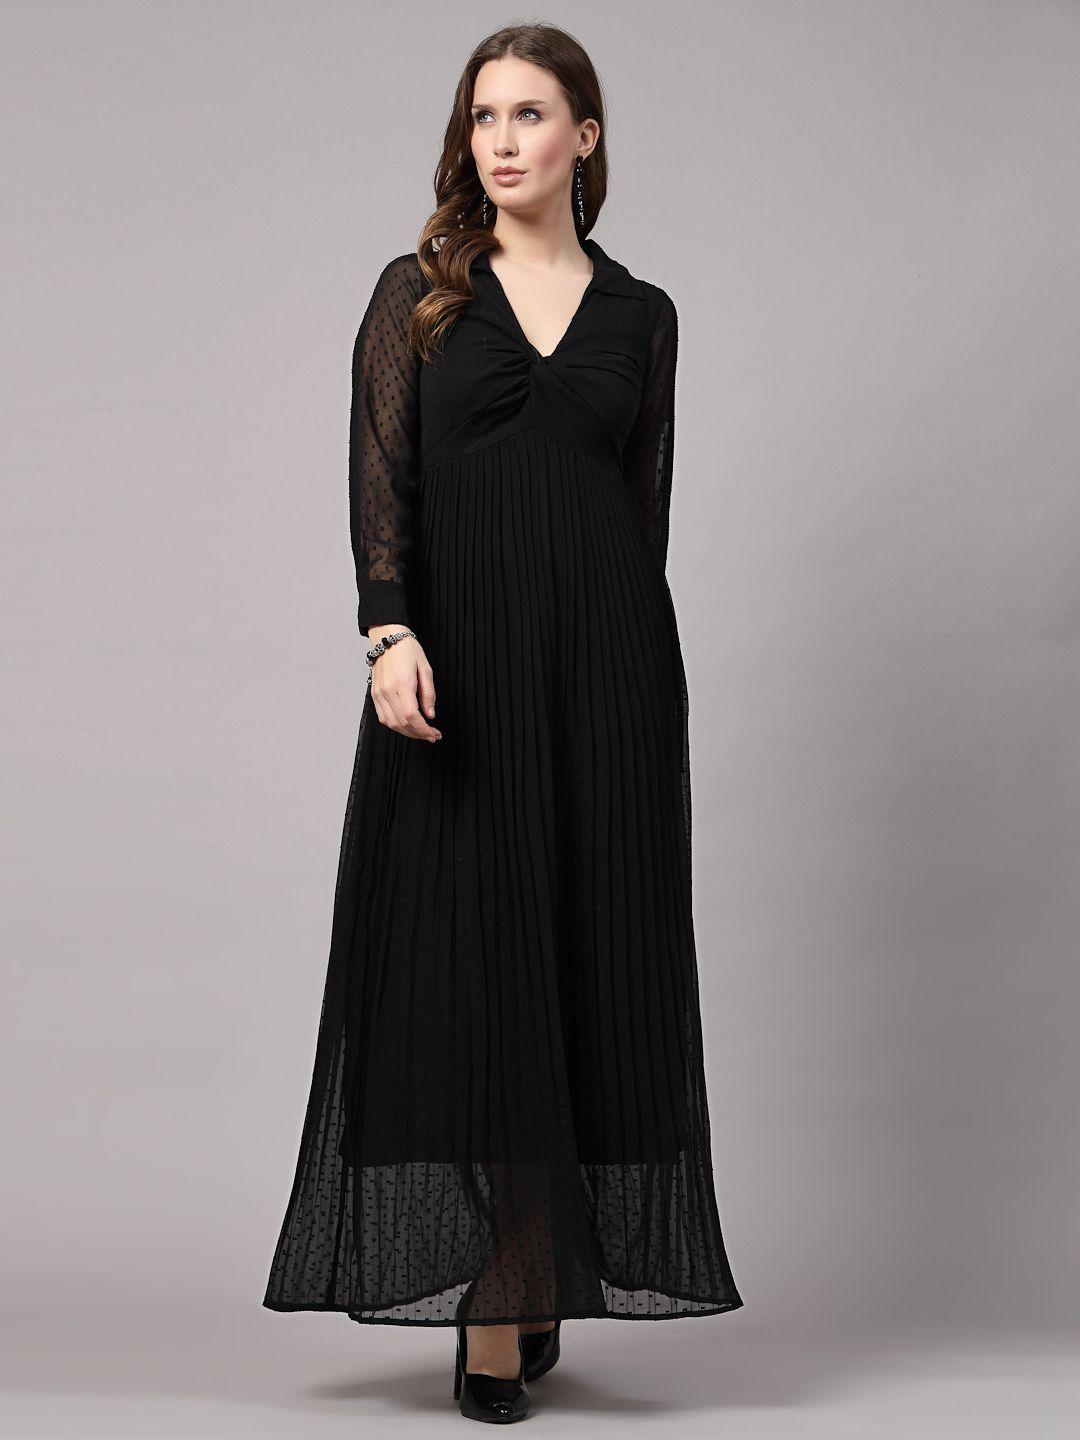 aayu V-Neck Opaque Georgette Maxi Dress